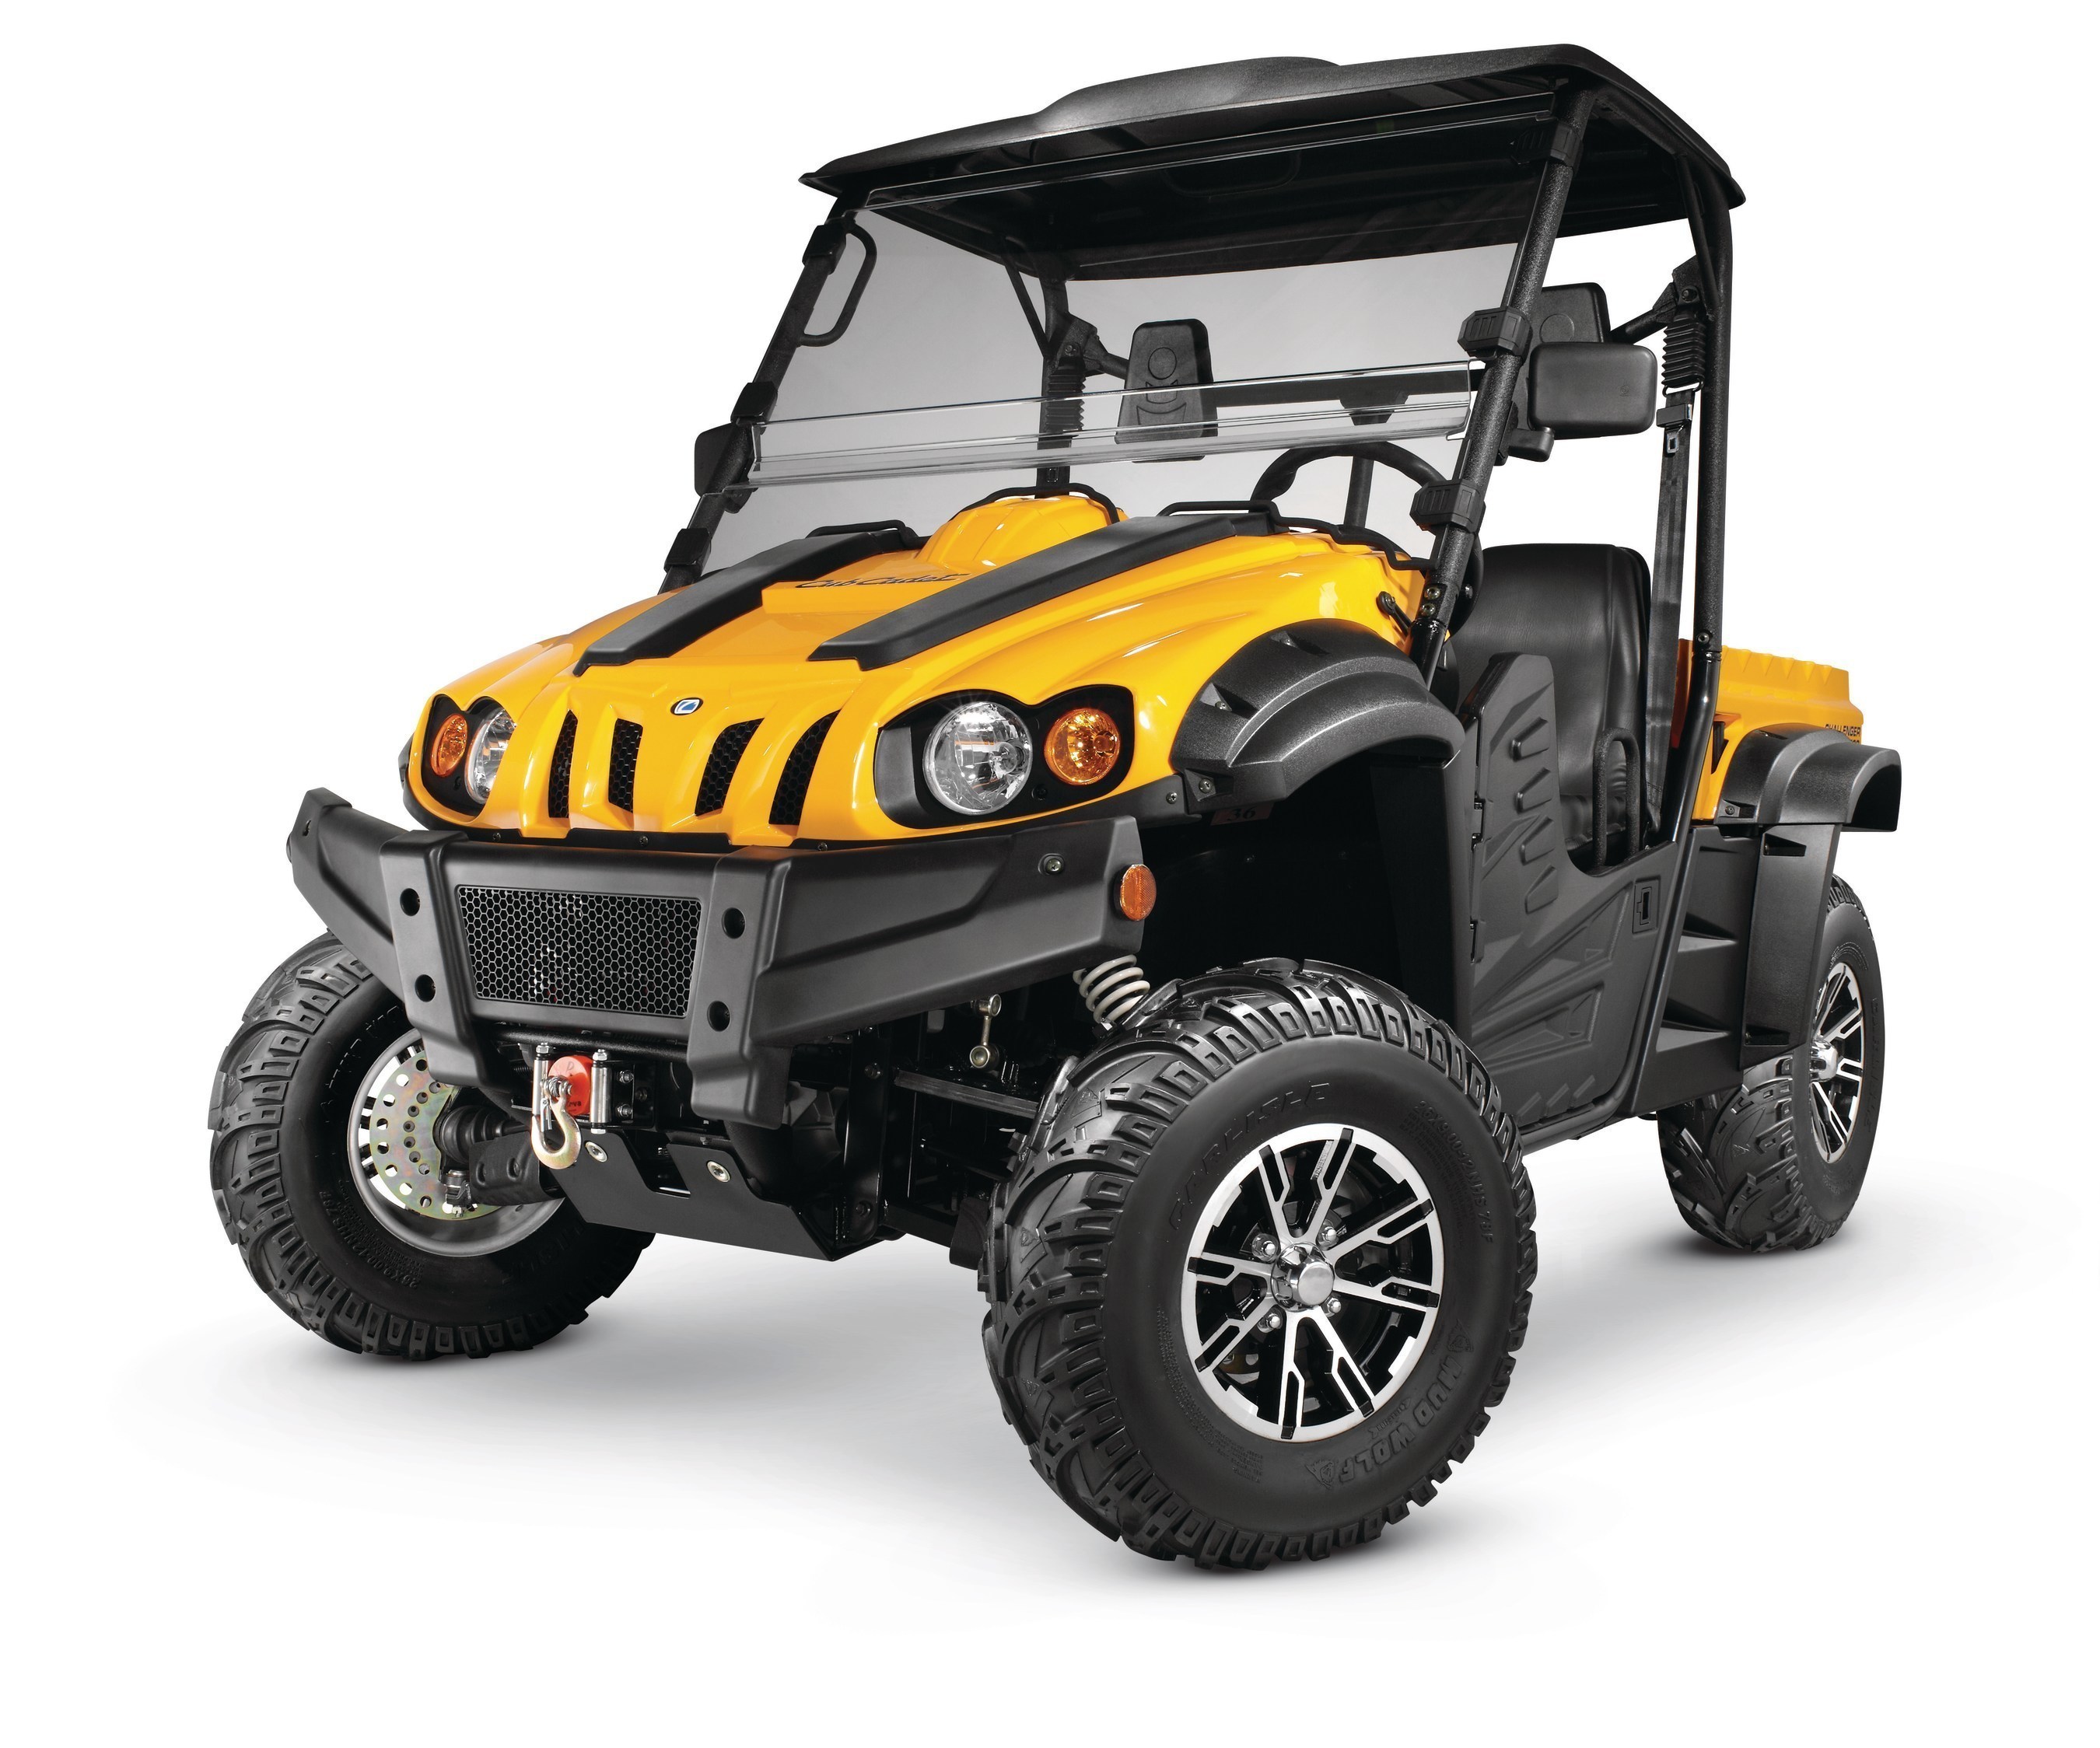 Cub Cadet is expanding its UTV line-up with the launch of the new Challenger Series. Backed by the strength of Cub Cadet's dealer network, the Challenger Series features incredible performance, versatility and one of the best standard equipment packages in the industry